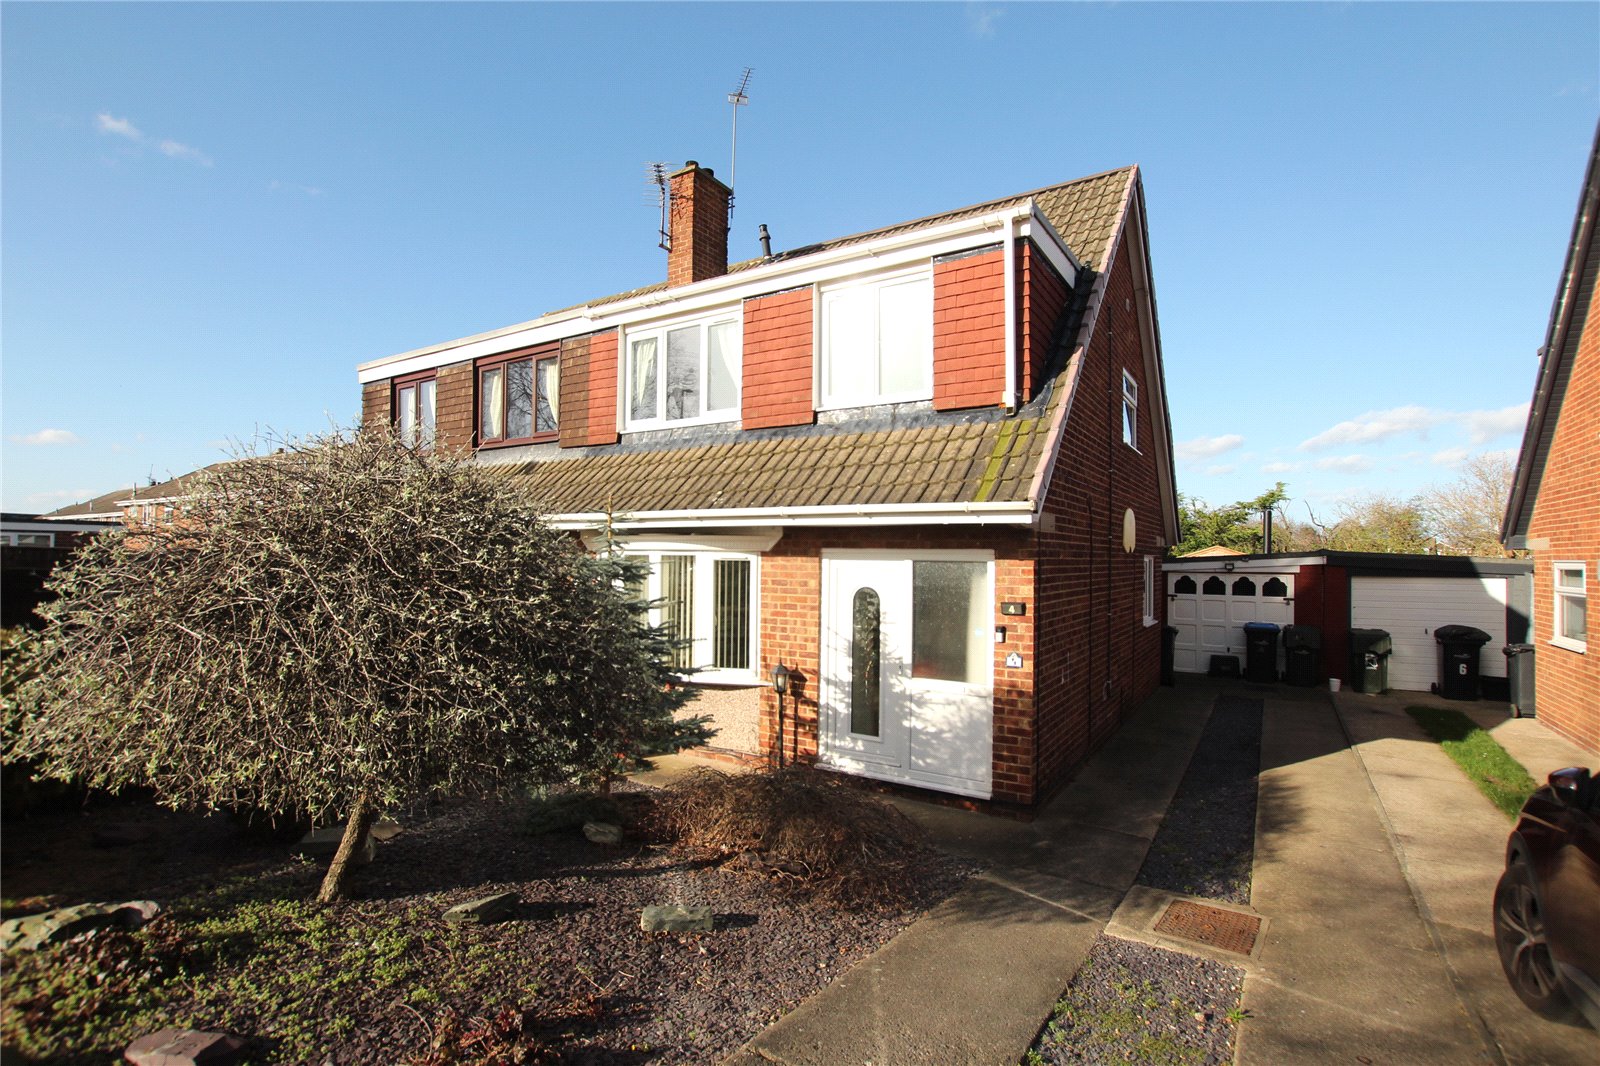 3 bed house for sale in Forcett Close, Acklam 1